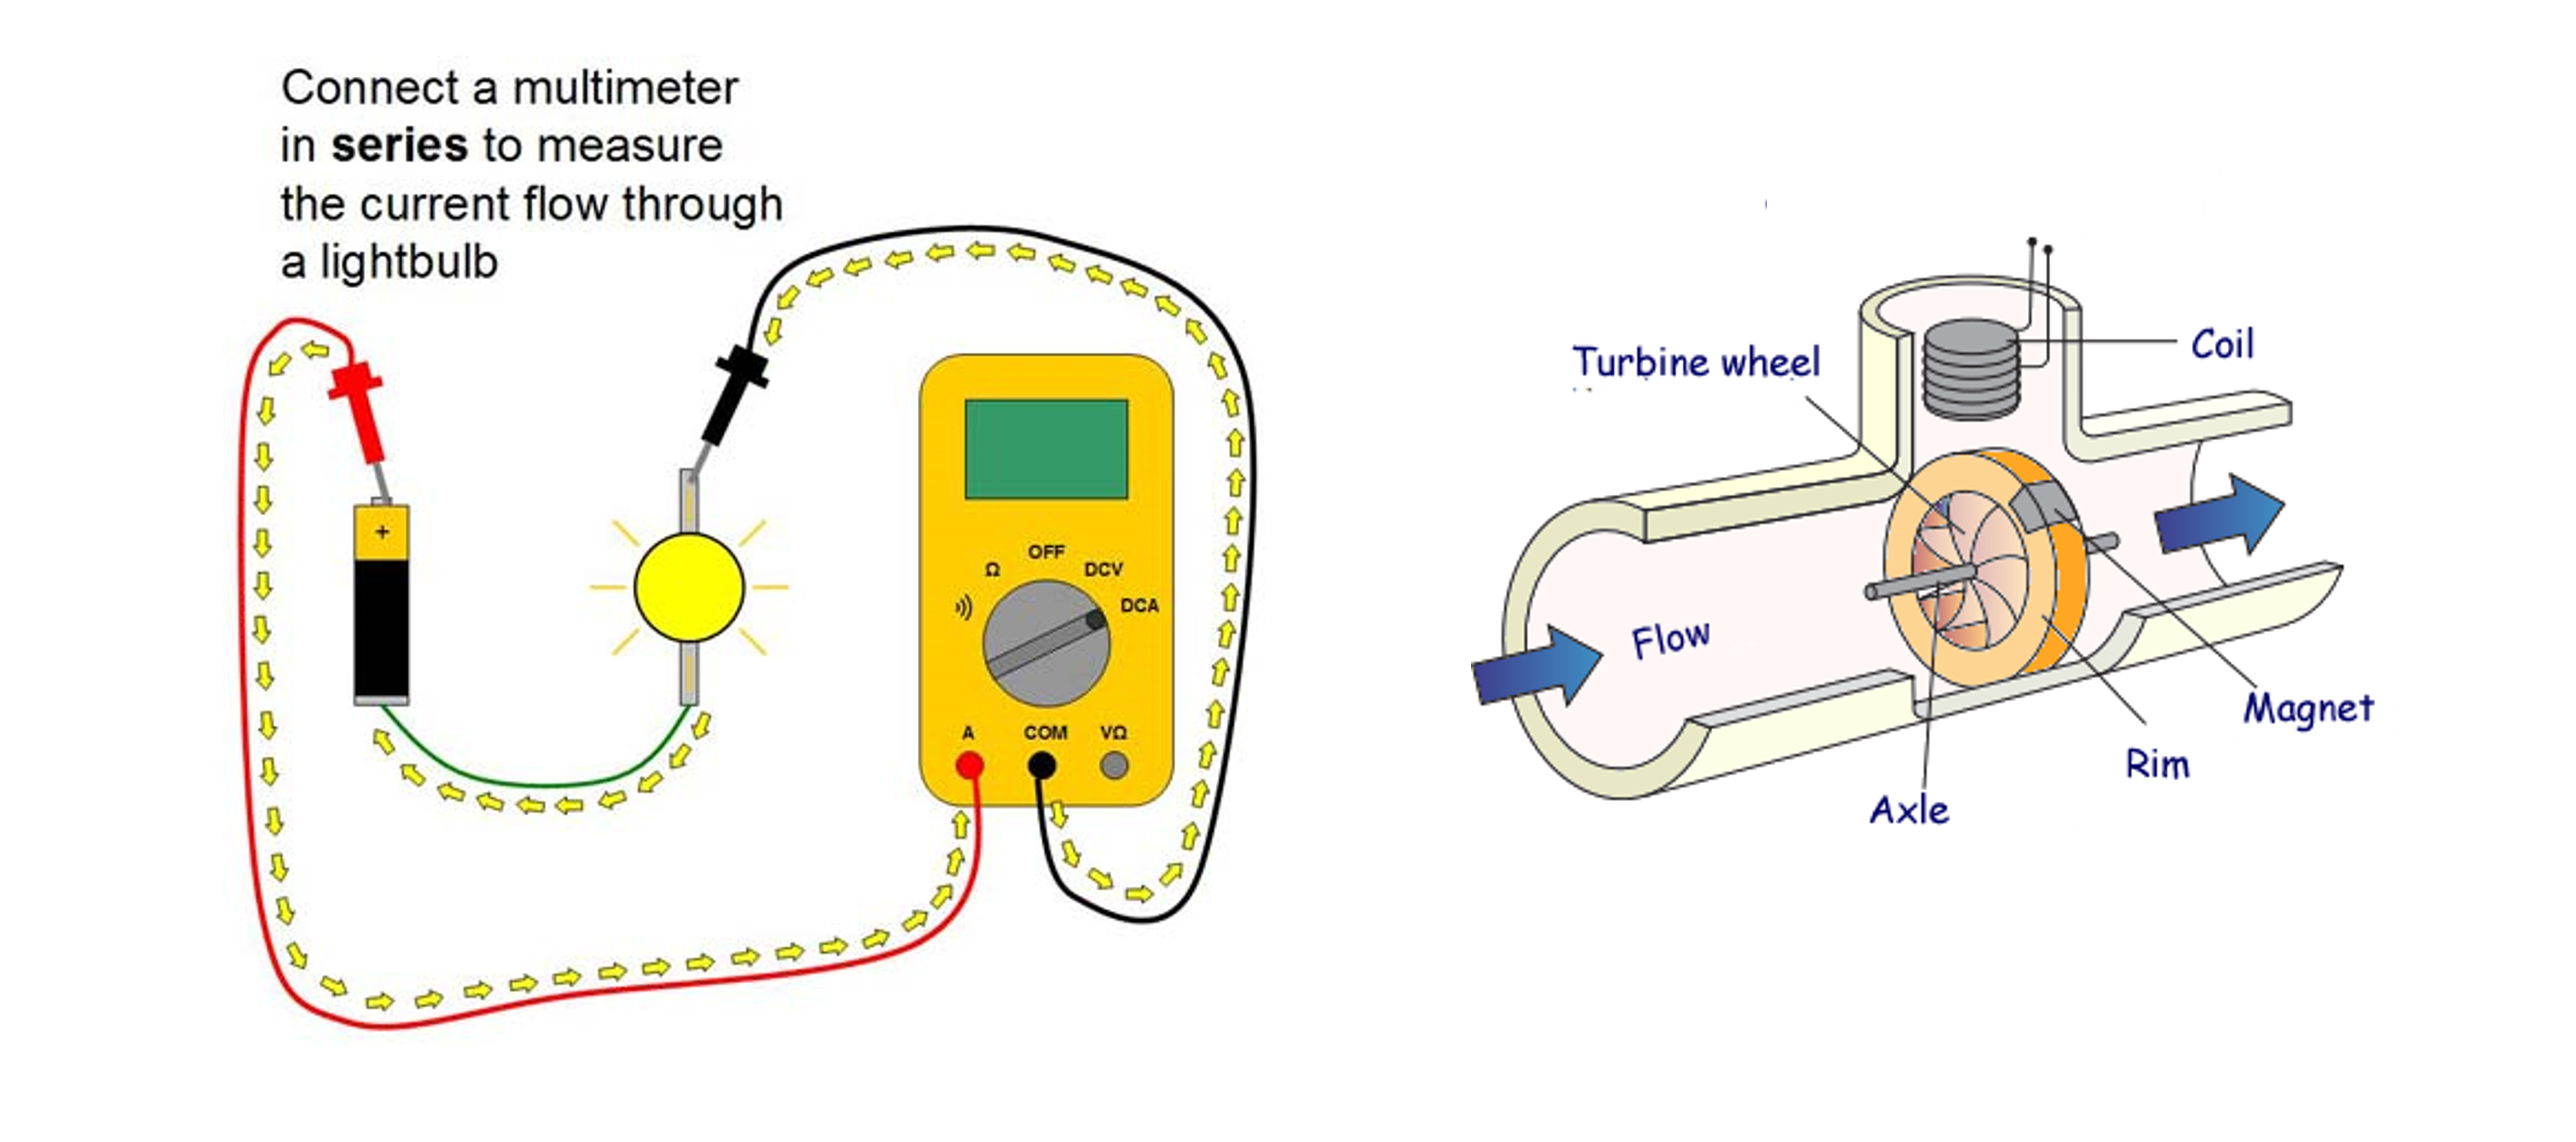 Image shows a water flow meter that uses a turbine in series with a pipe to measure water flow and makes analogy to measure current in line with an ammeter